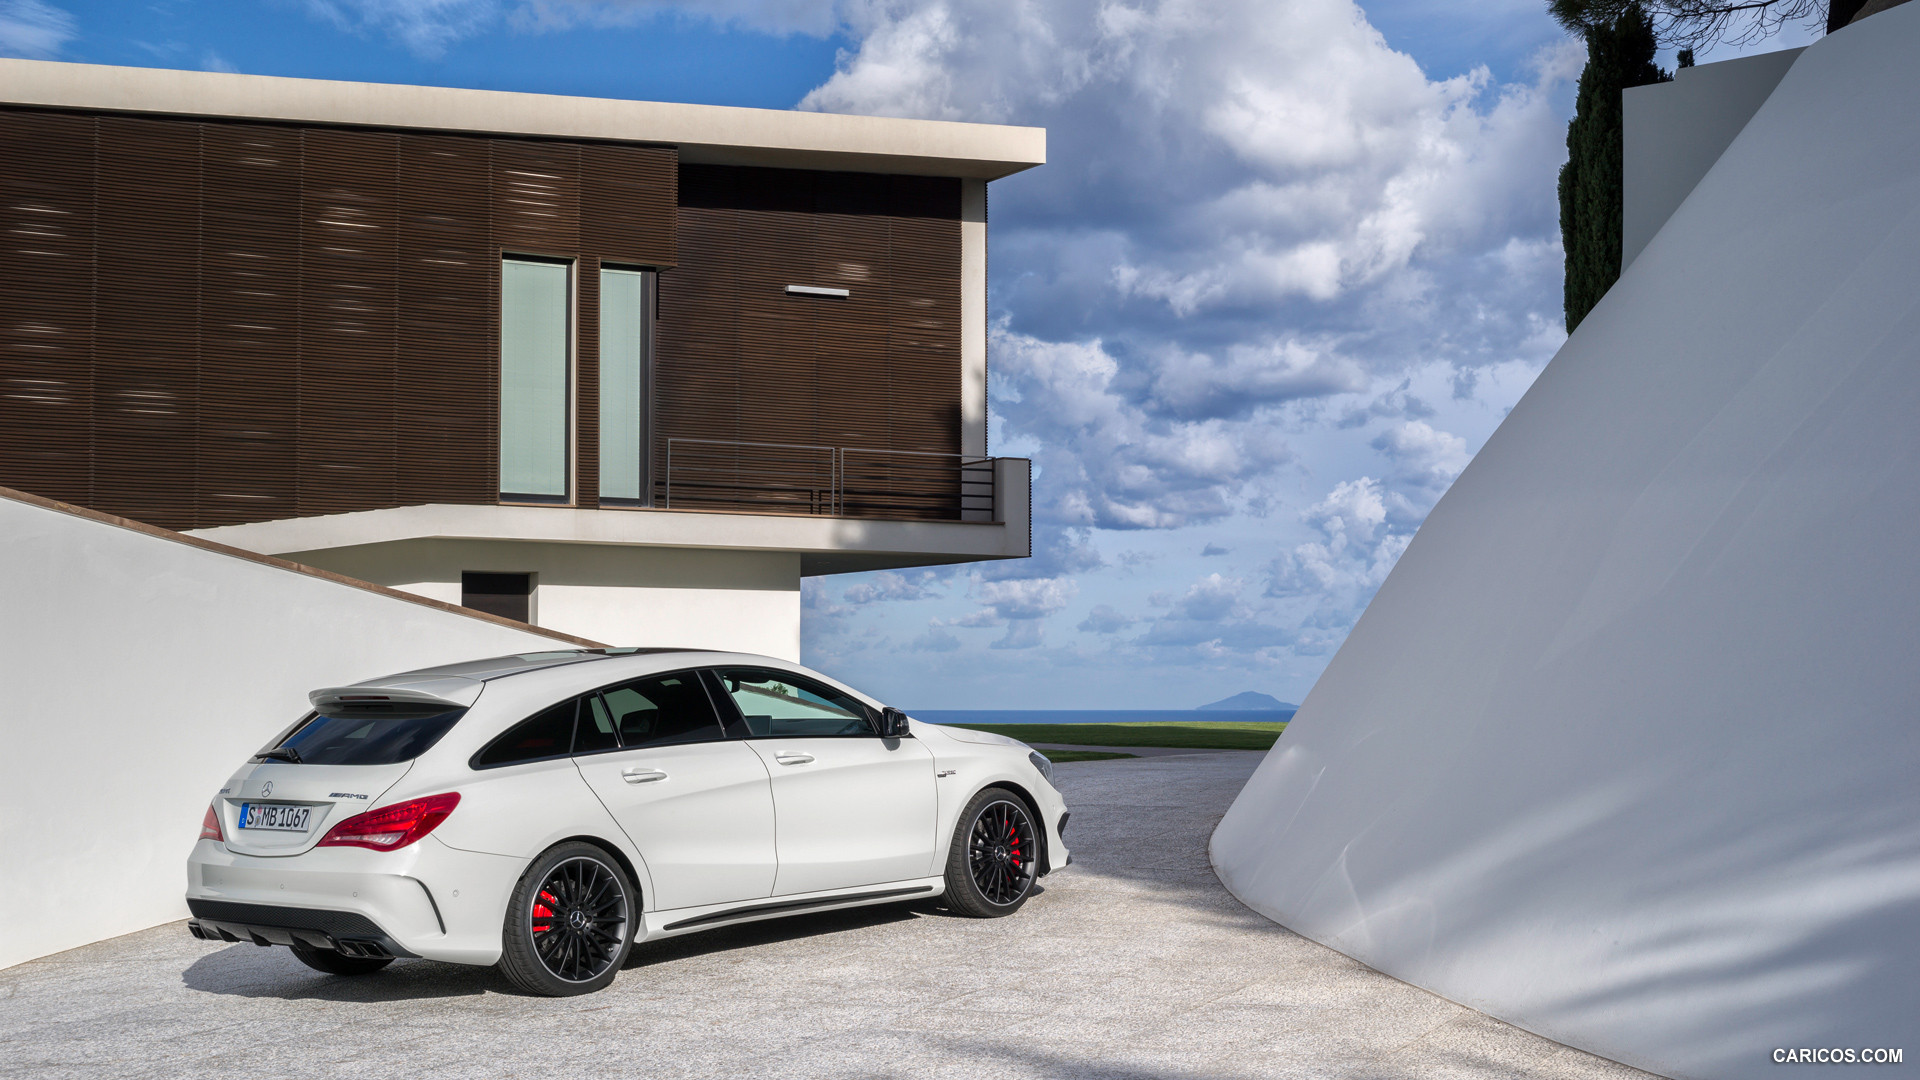 2015 Mercedes-Benz CLA 45 AMG Shooting Brake (Calcite White) - Side, #30 of 70